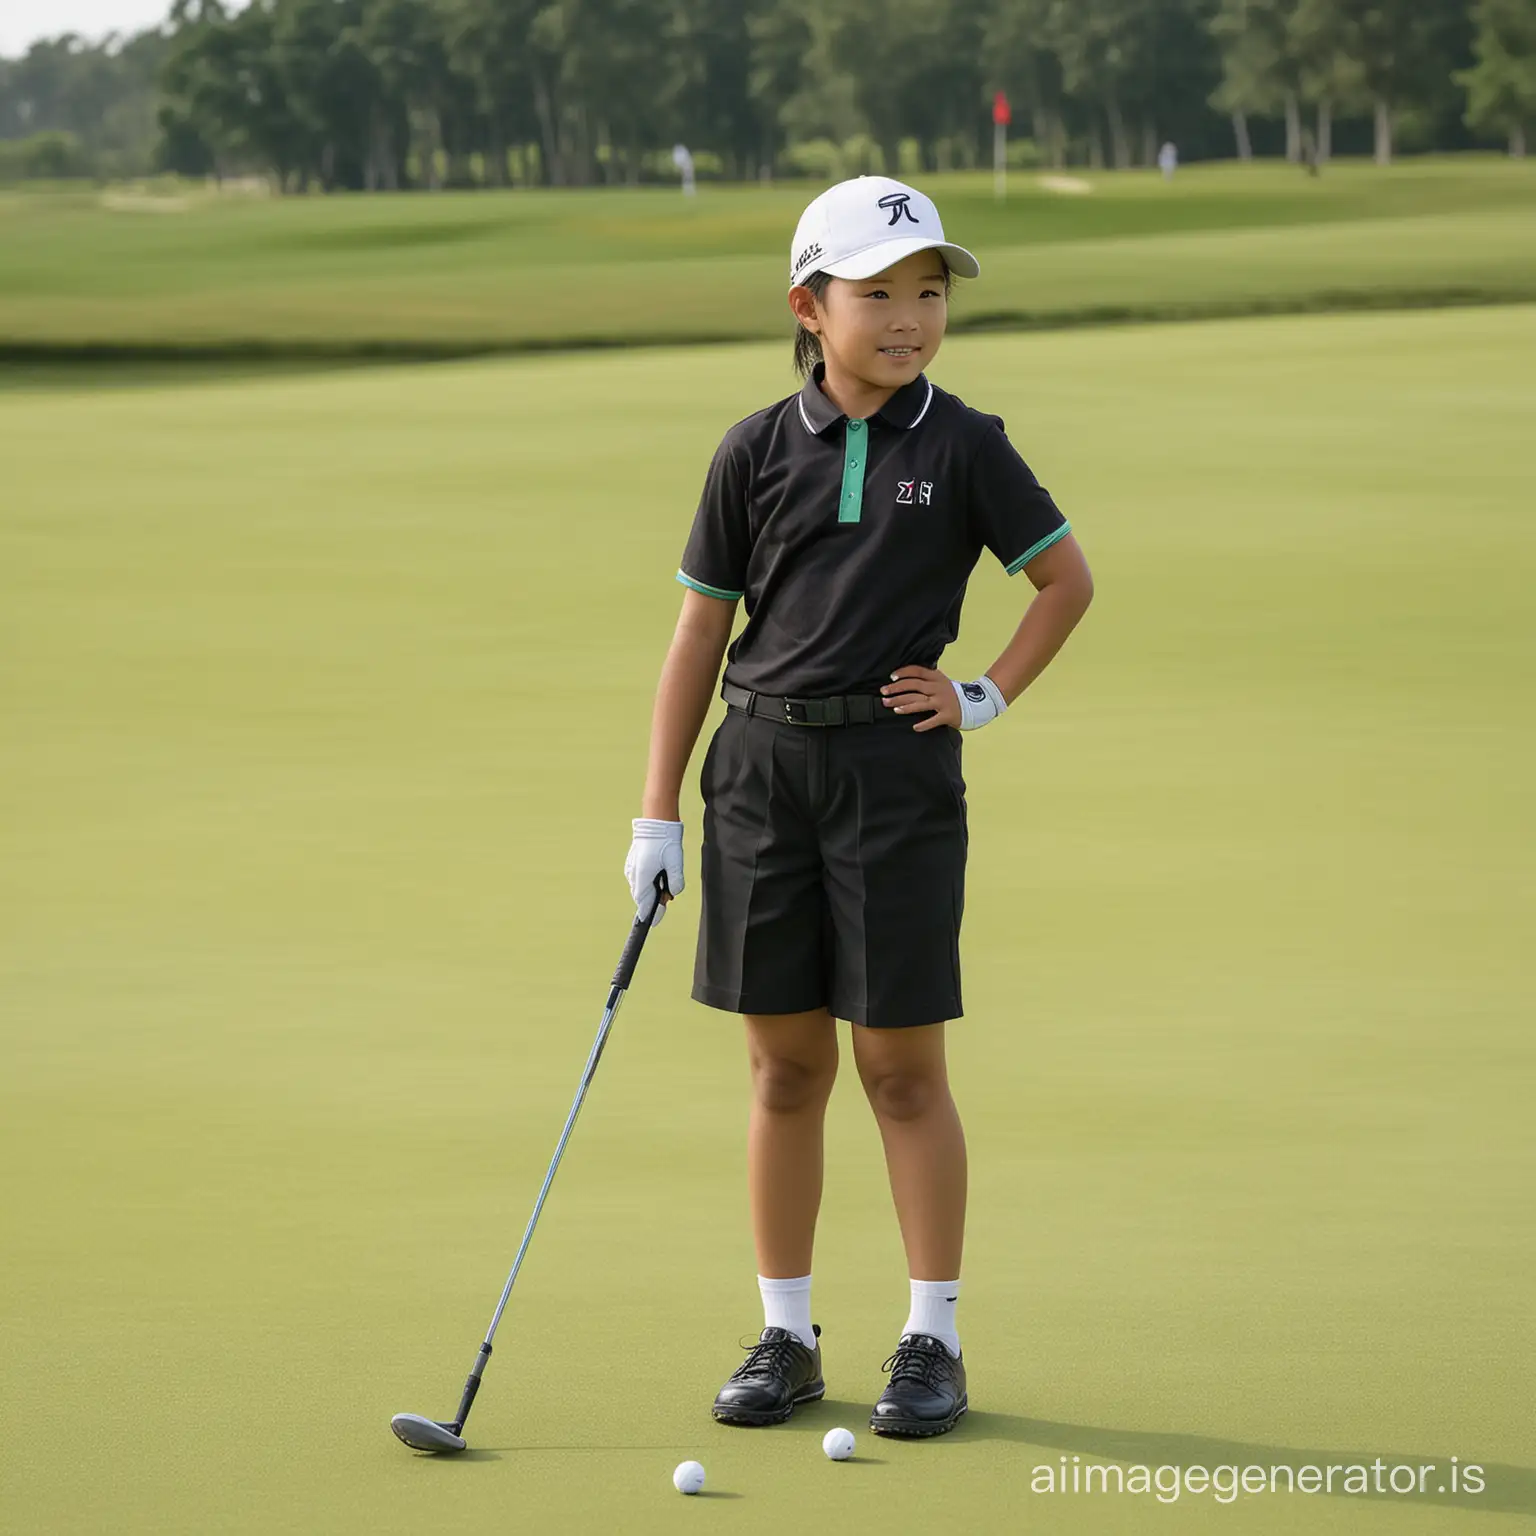 Young-Asian-Golfer-Practicing-on-the-Fairway